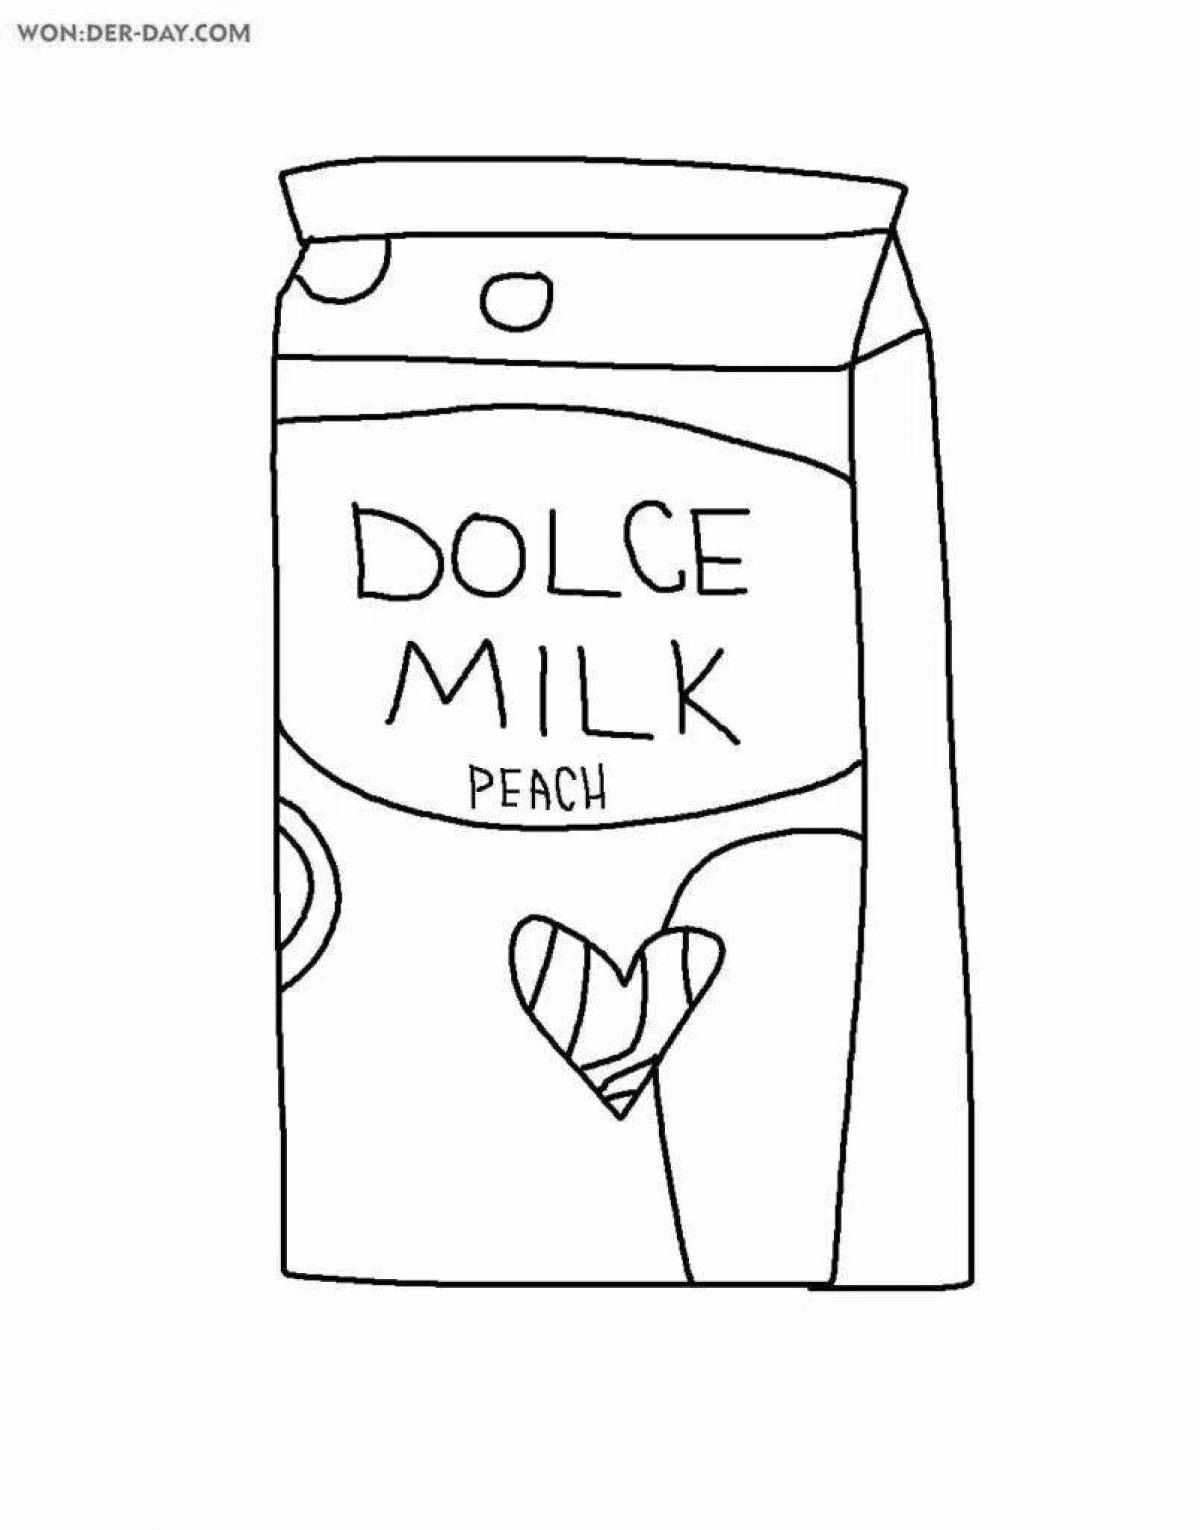 Dolce glossy milk lipstick coloring page